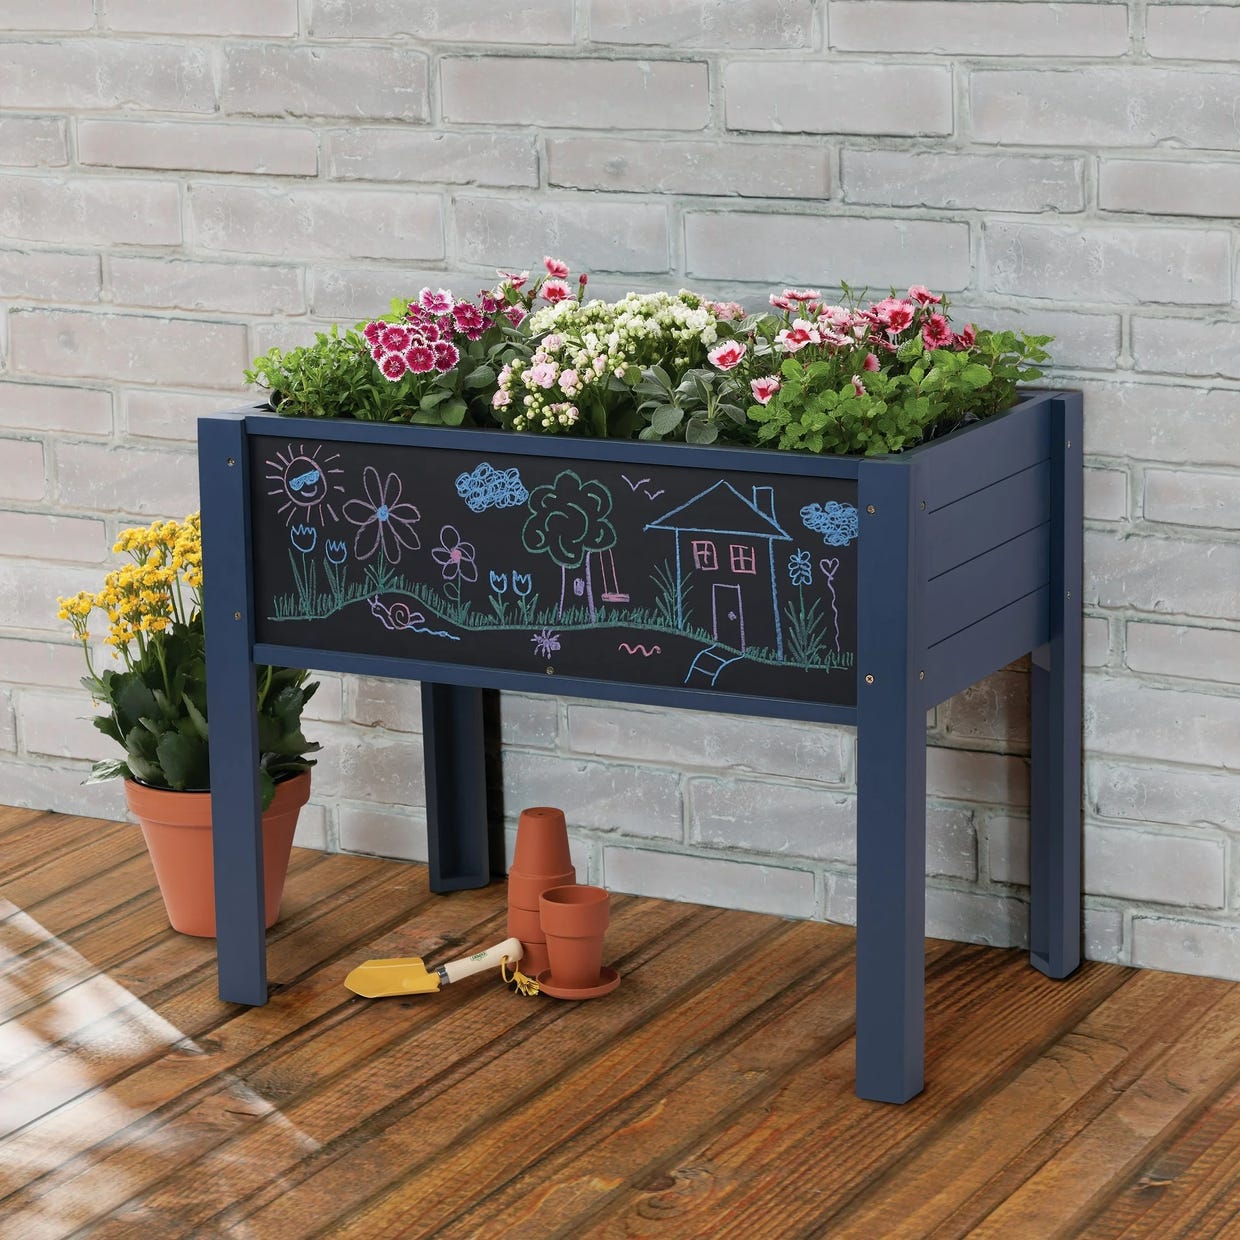 A raised garden bed with a chalkboard panel filled with plants on a wooden deck, a watering can, terracotta pots, and gardening tools beside it.